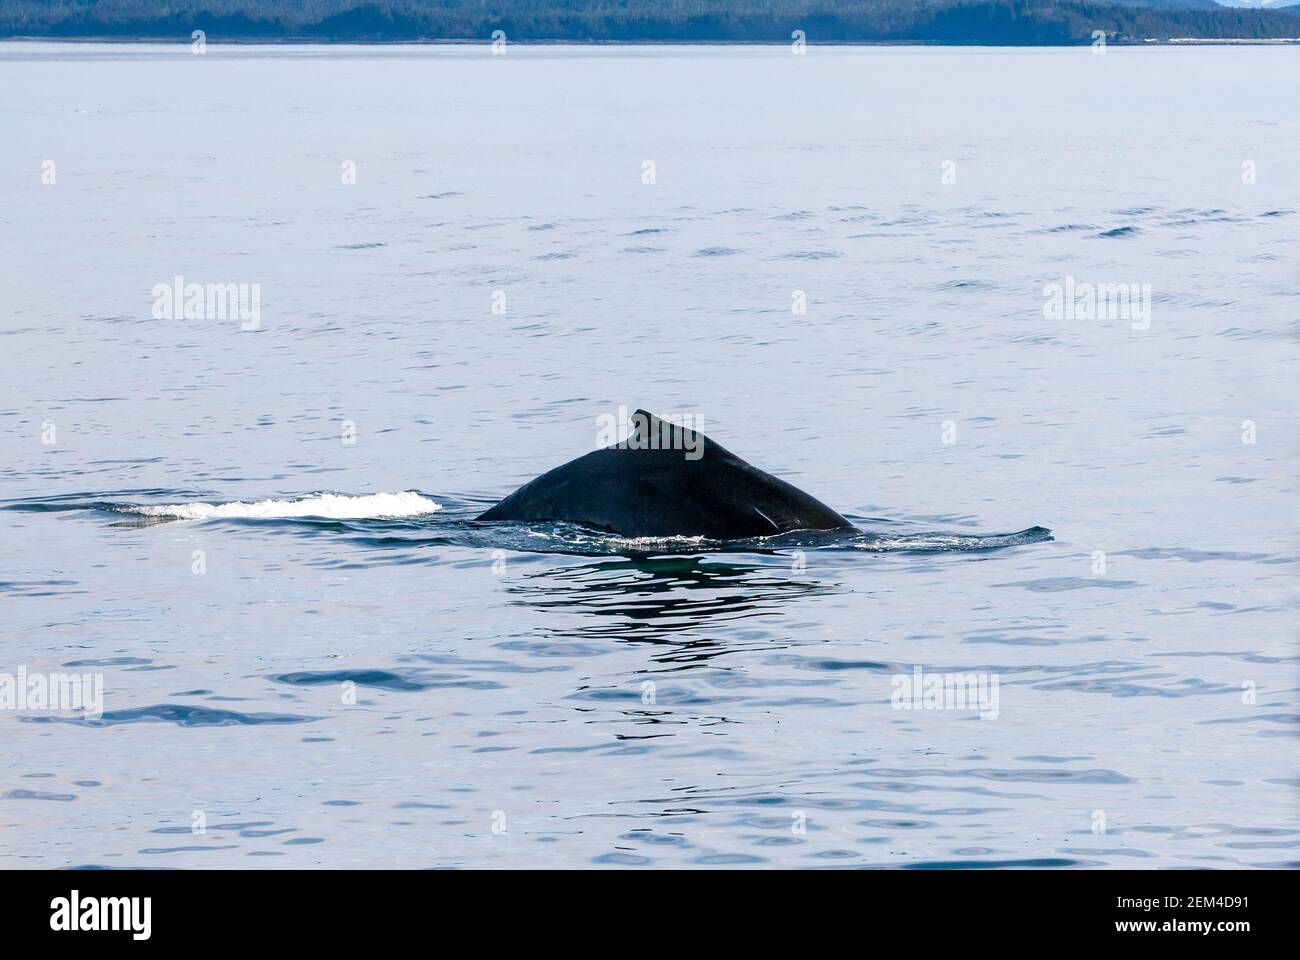 Dorsal fin of a Humpback whale (Megaptera novaeangliae) surfacing in the waters of southern Alaska Stock Photo